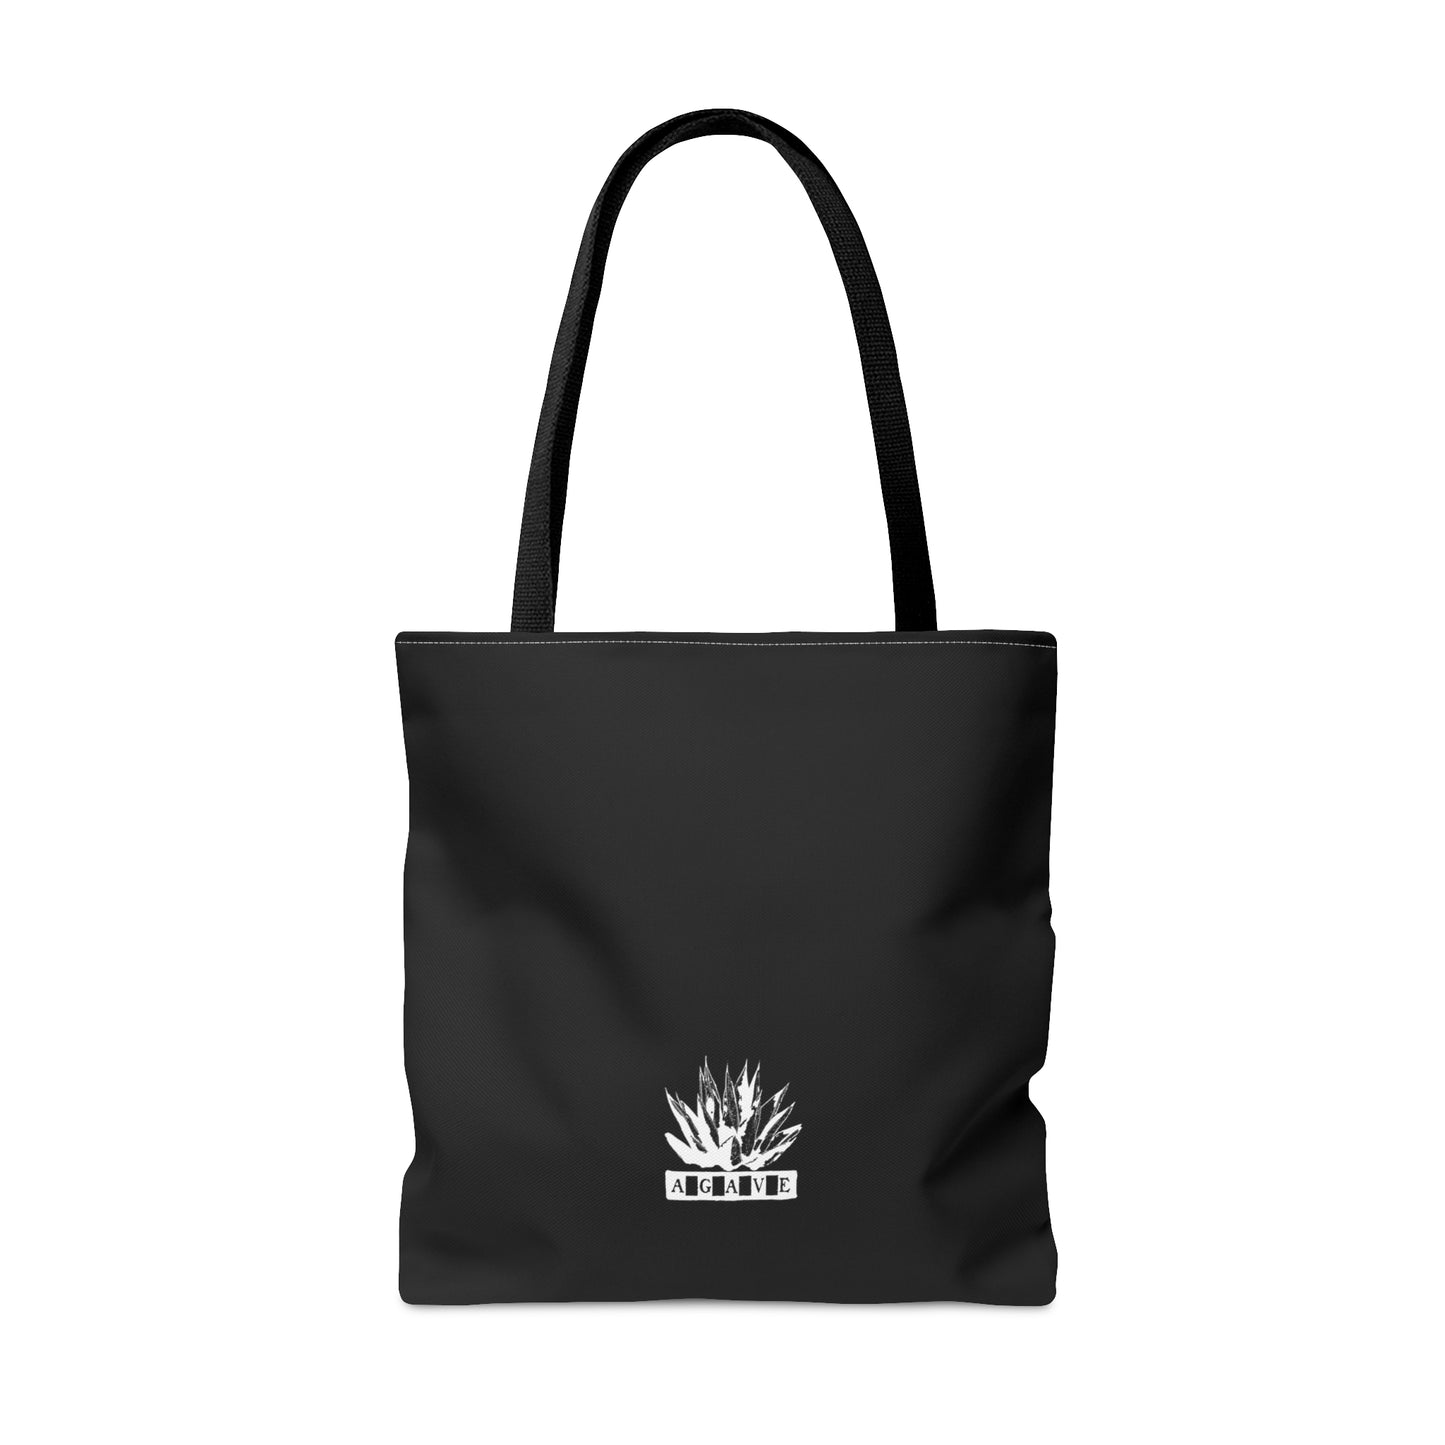 Simmer Down Tote